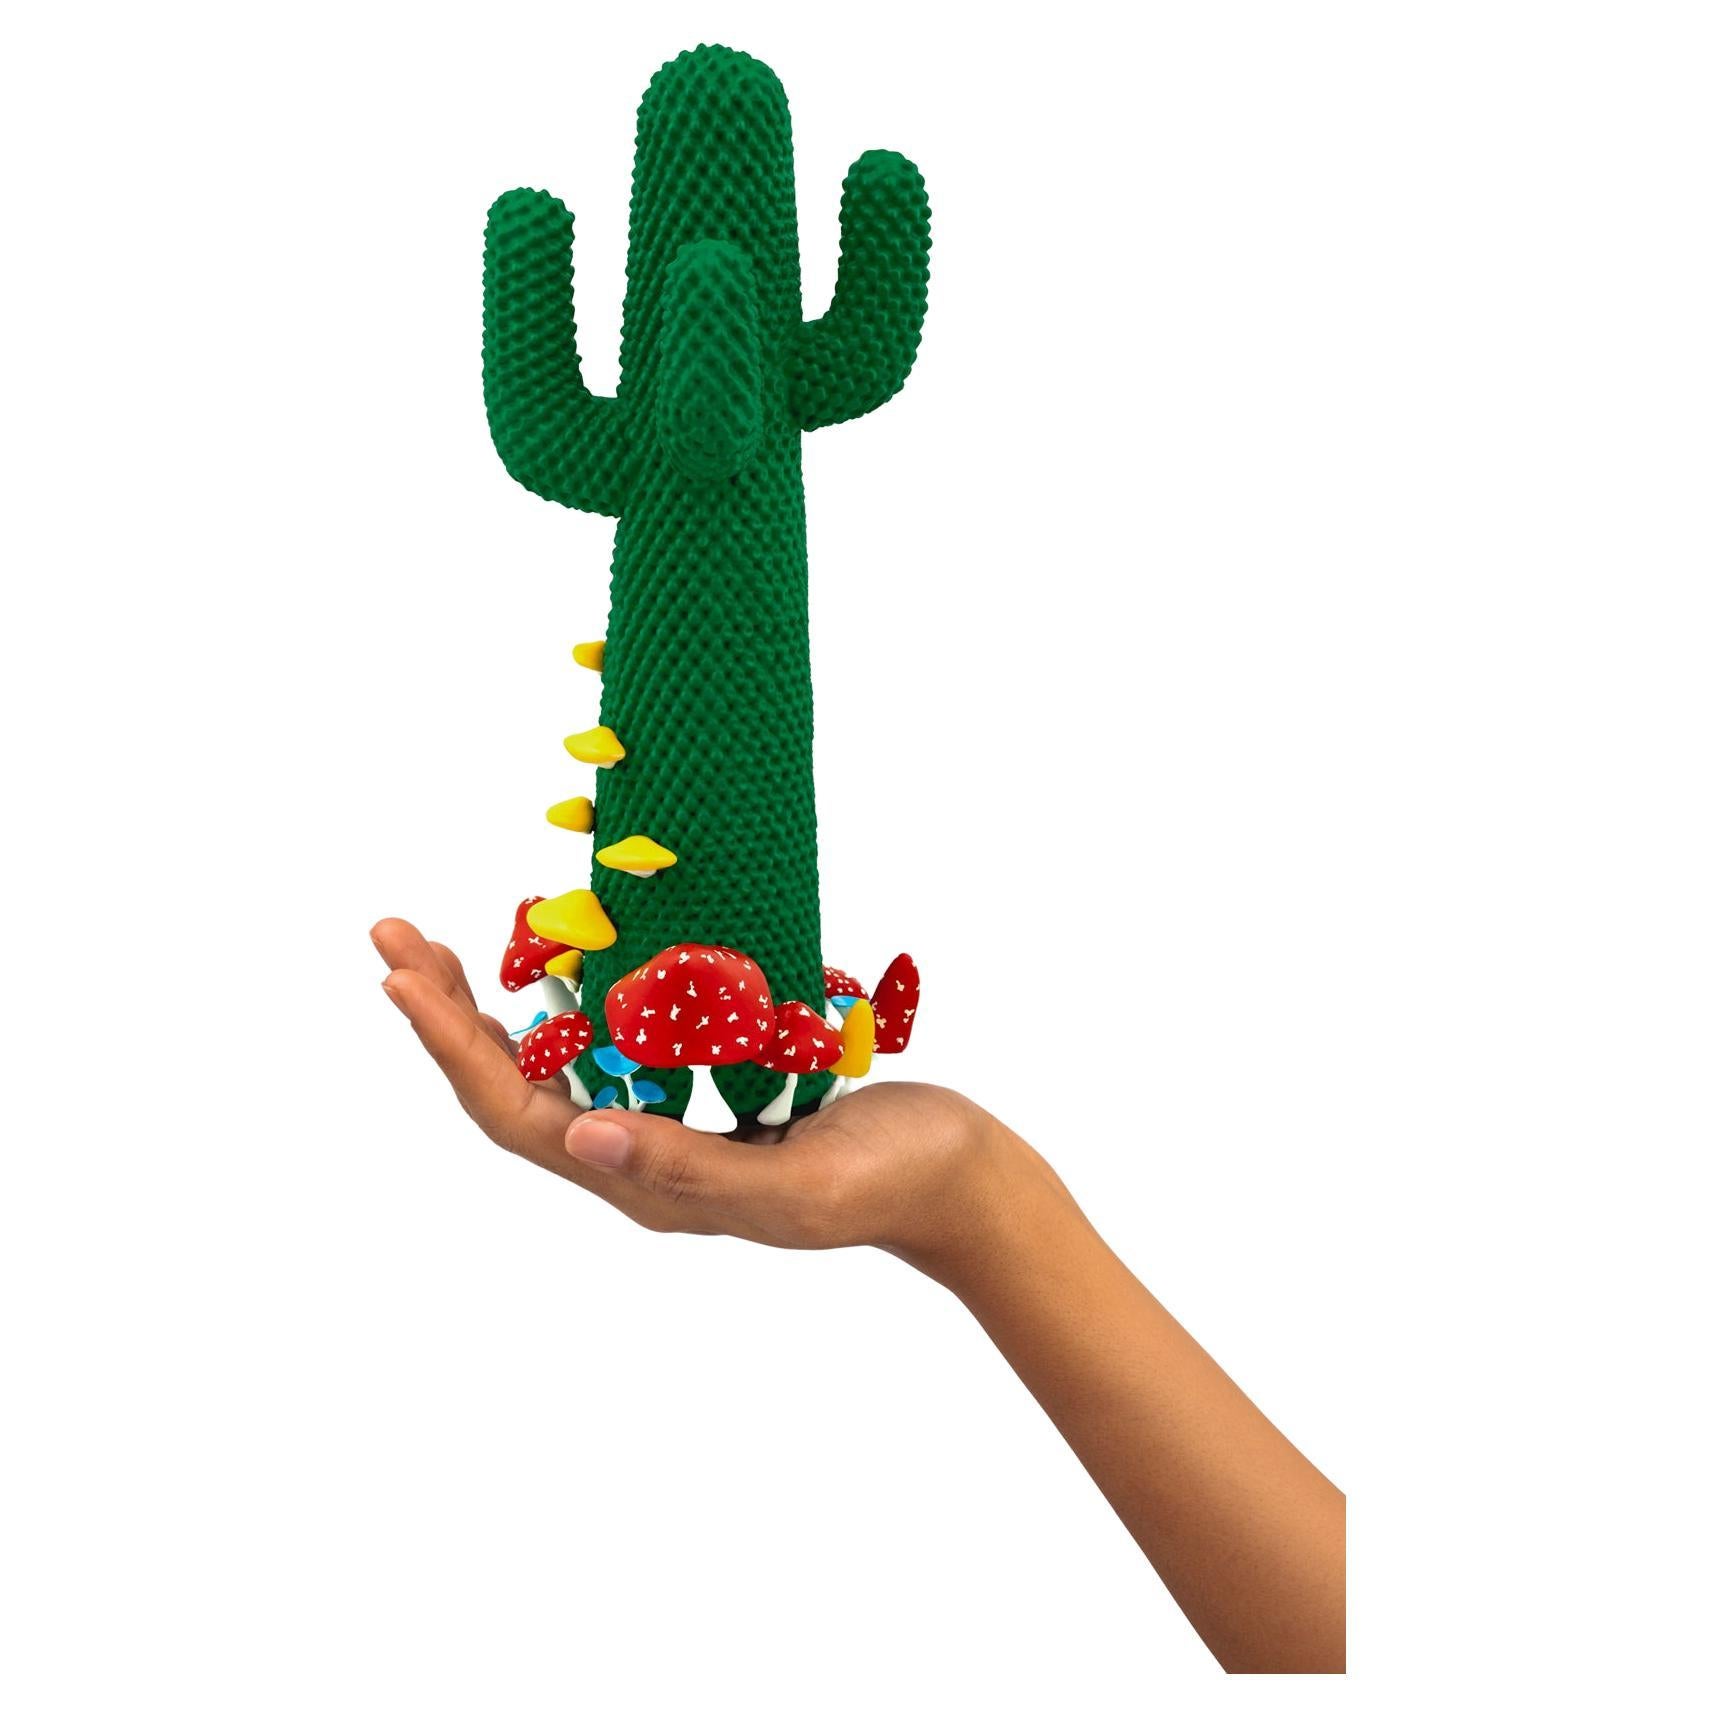 Limited Edition #80/99

Gufram presents the miniaturised version of the Shroom CACTUS® created in collaboration with A$AP Rocky and the artist’s new design studio HOMMEMADE Exactly as the real-Size Shroom CACTUS®, the new Guframini piece features